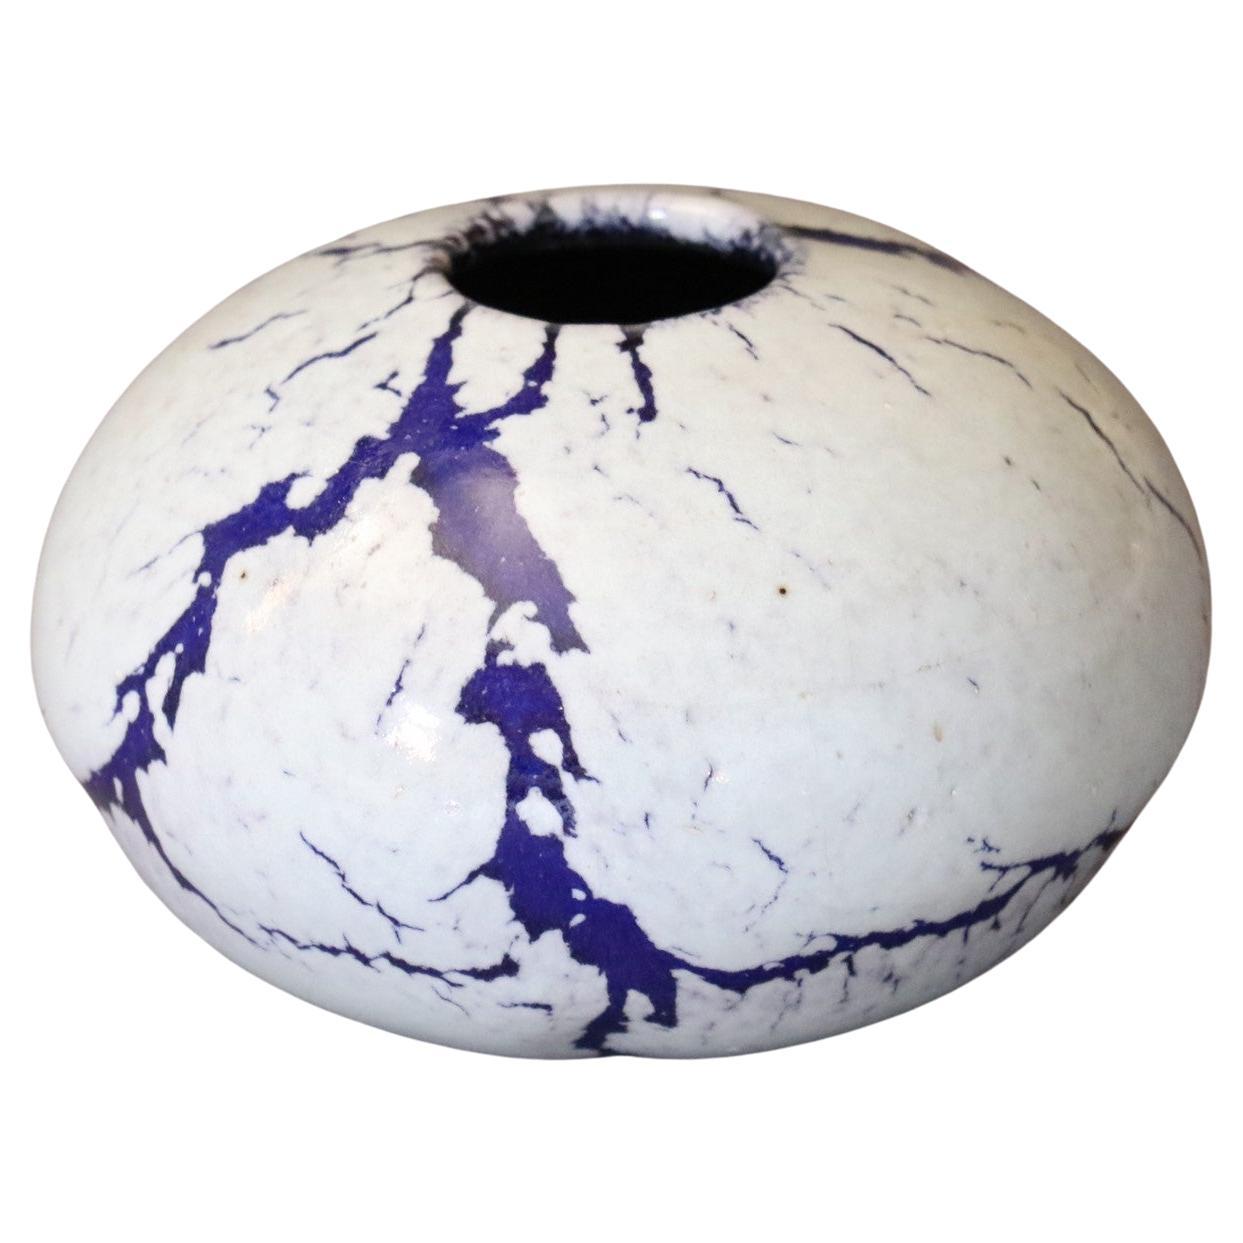 French ceramic ball vase by Marc Uzan - circa 2000
Delicate enamelling in white and violet tones - Ring neck
Signed under the base
Very good condition

--------------------------
Born in Sousse, Tunisia in 1955, Marc Uzan discovered modelling